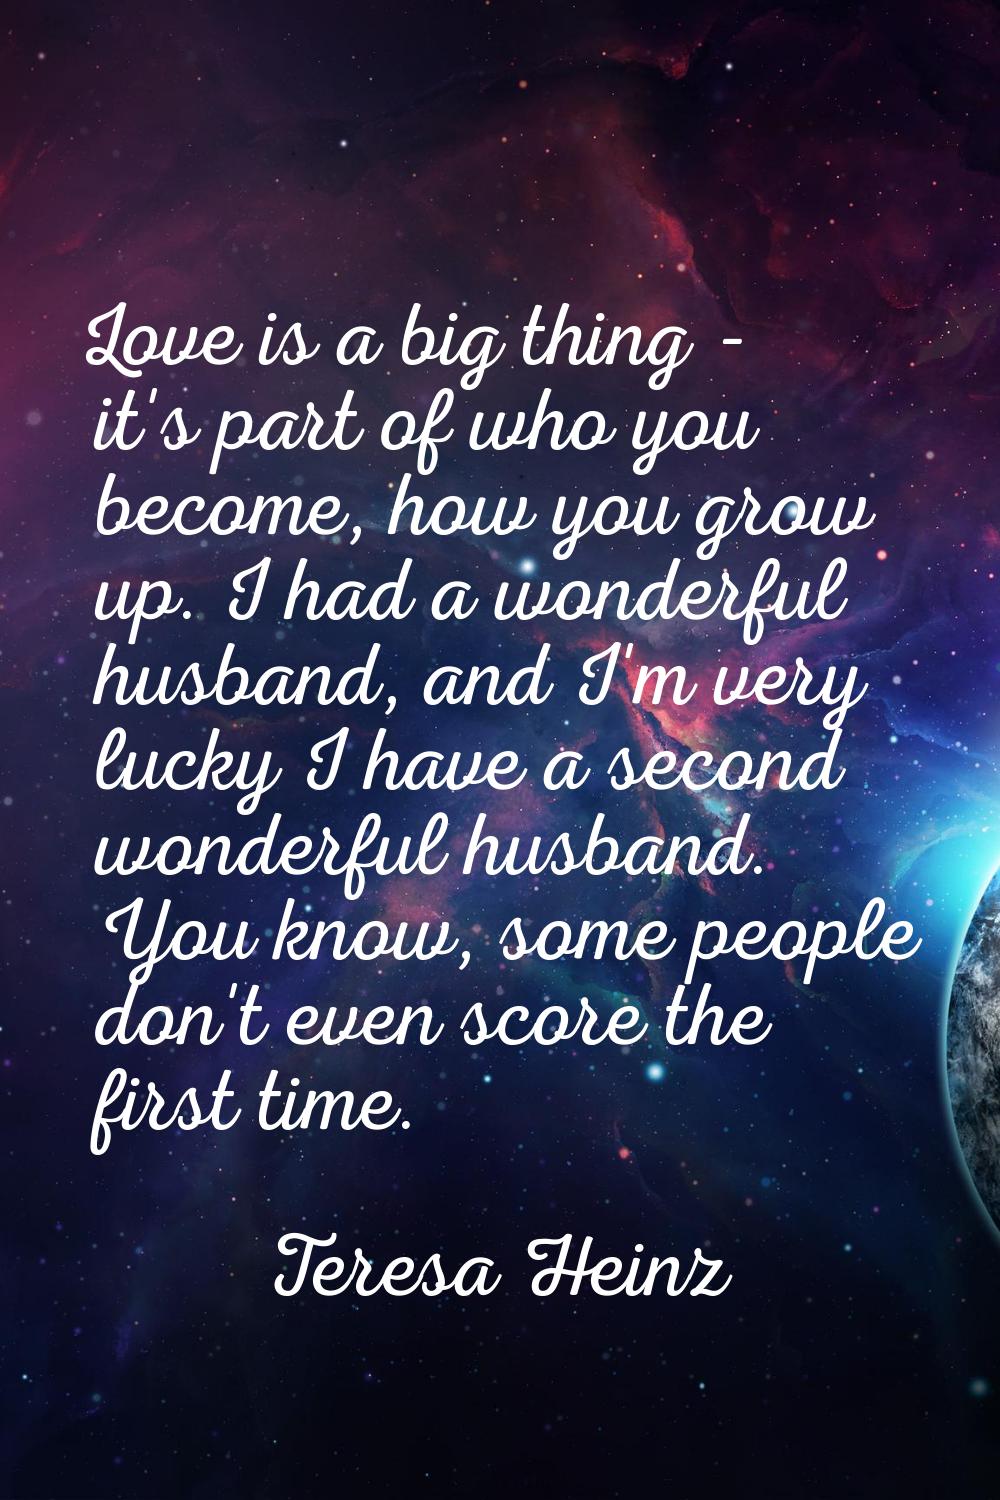 Love is a big thing - it's part of who you become, how you grow up. I had a wonderful husband, and 